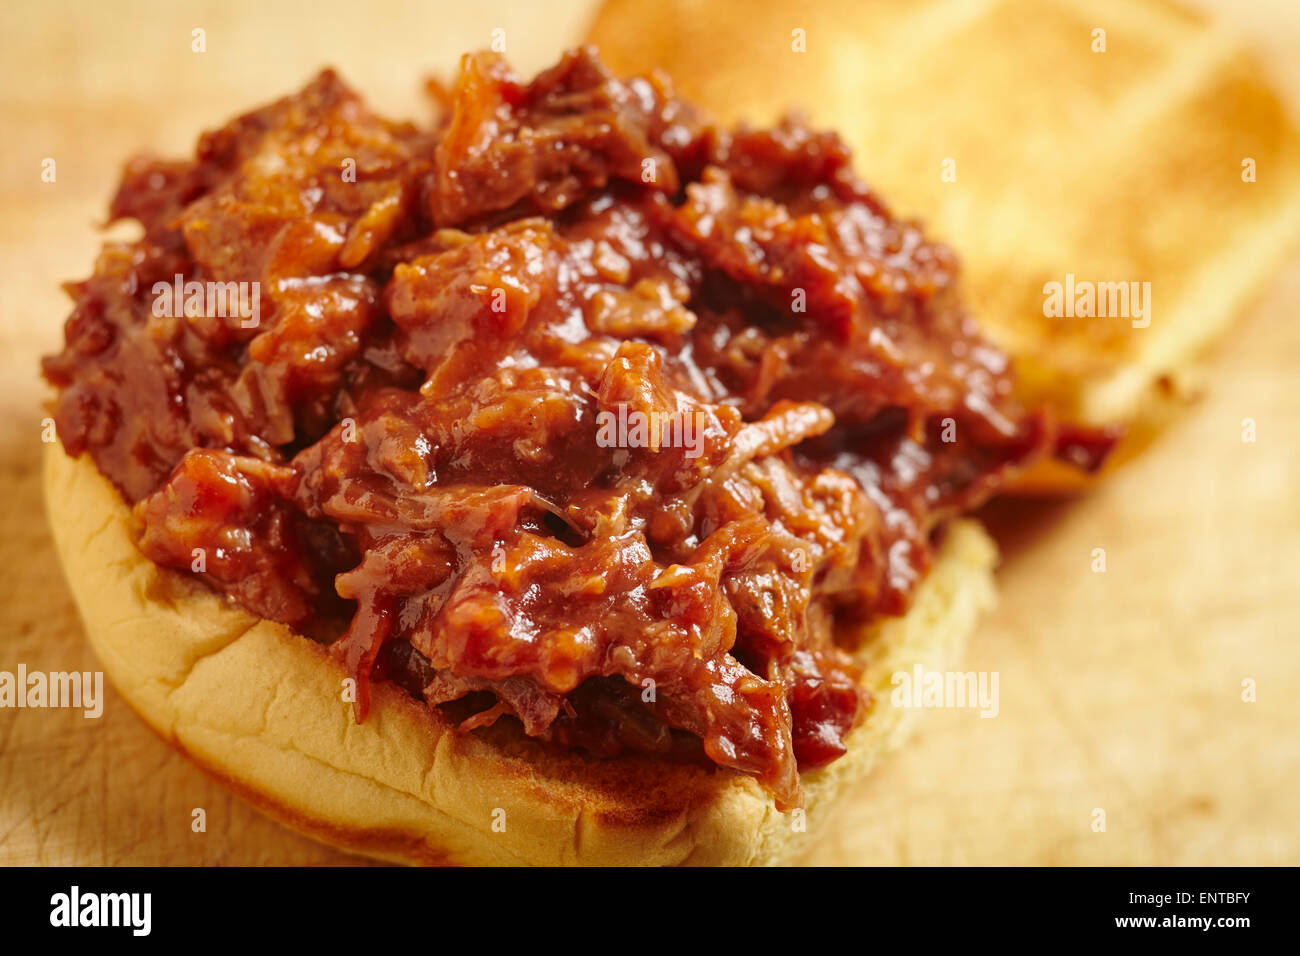 Pulled pork, a tradition food from the southern United States. It's Served here on a burger bun, a common way to eat it today. Stock Photo